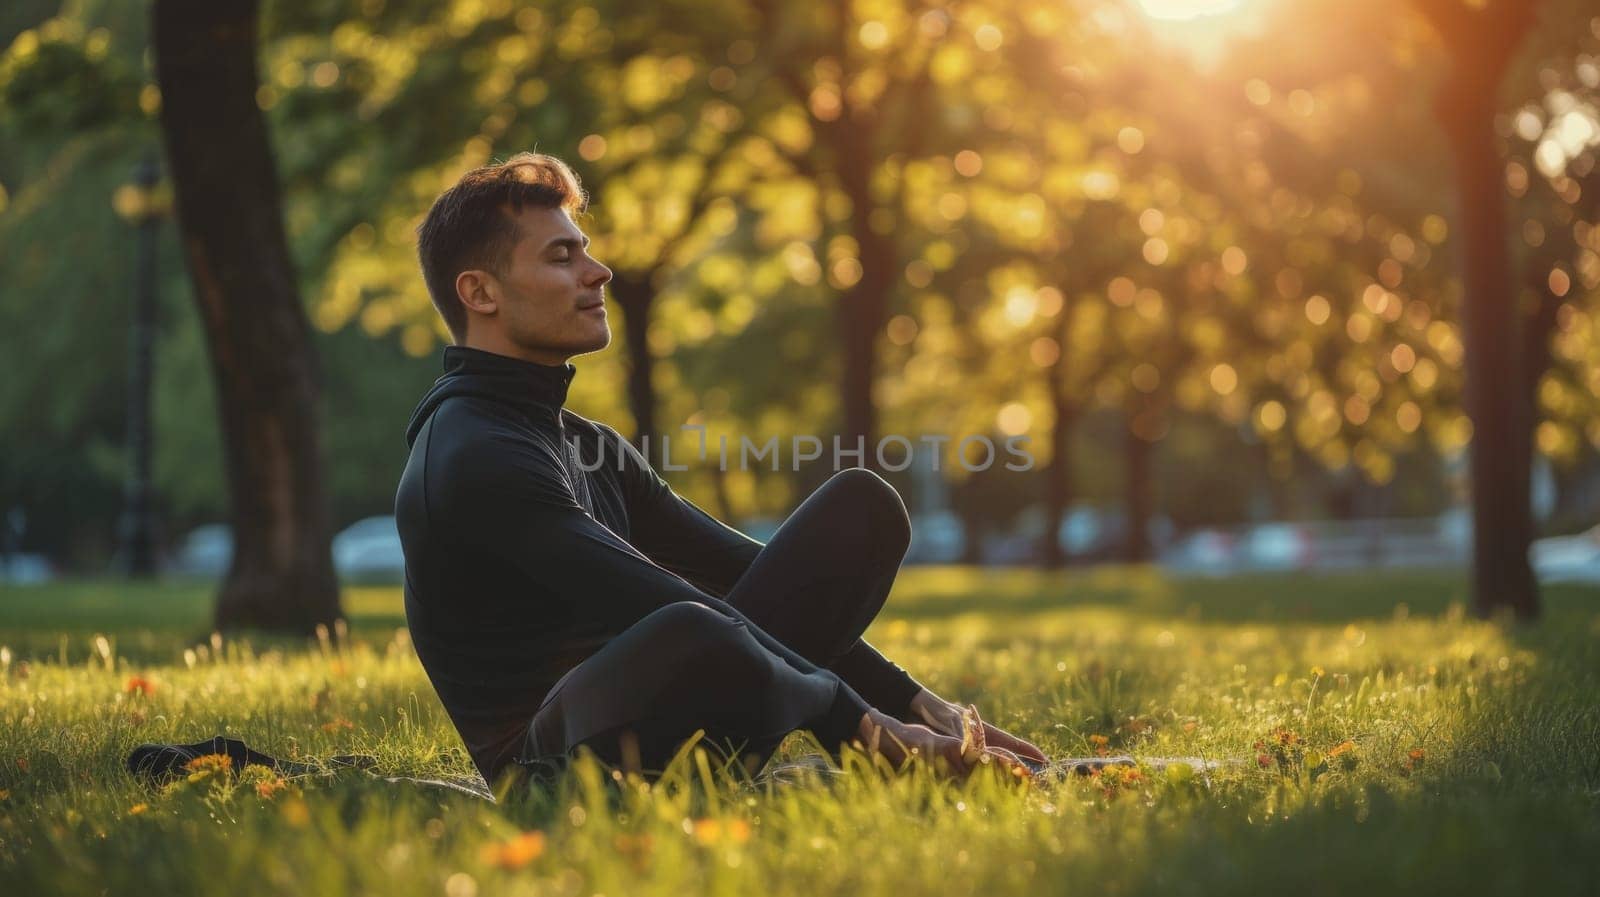 A man sitting on the grass in a park with trees behind him, AI by starush